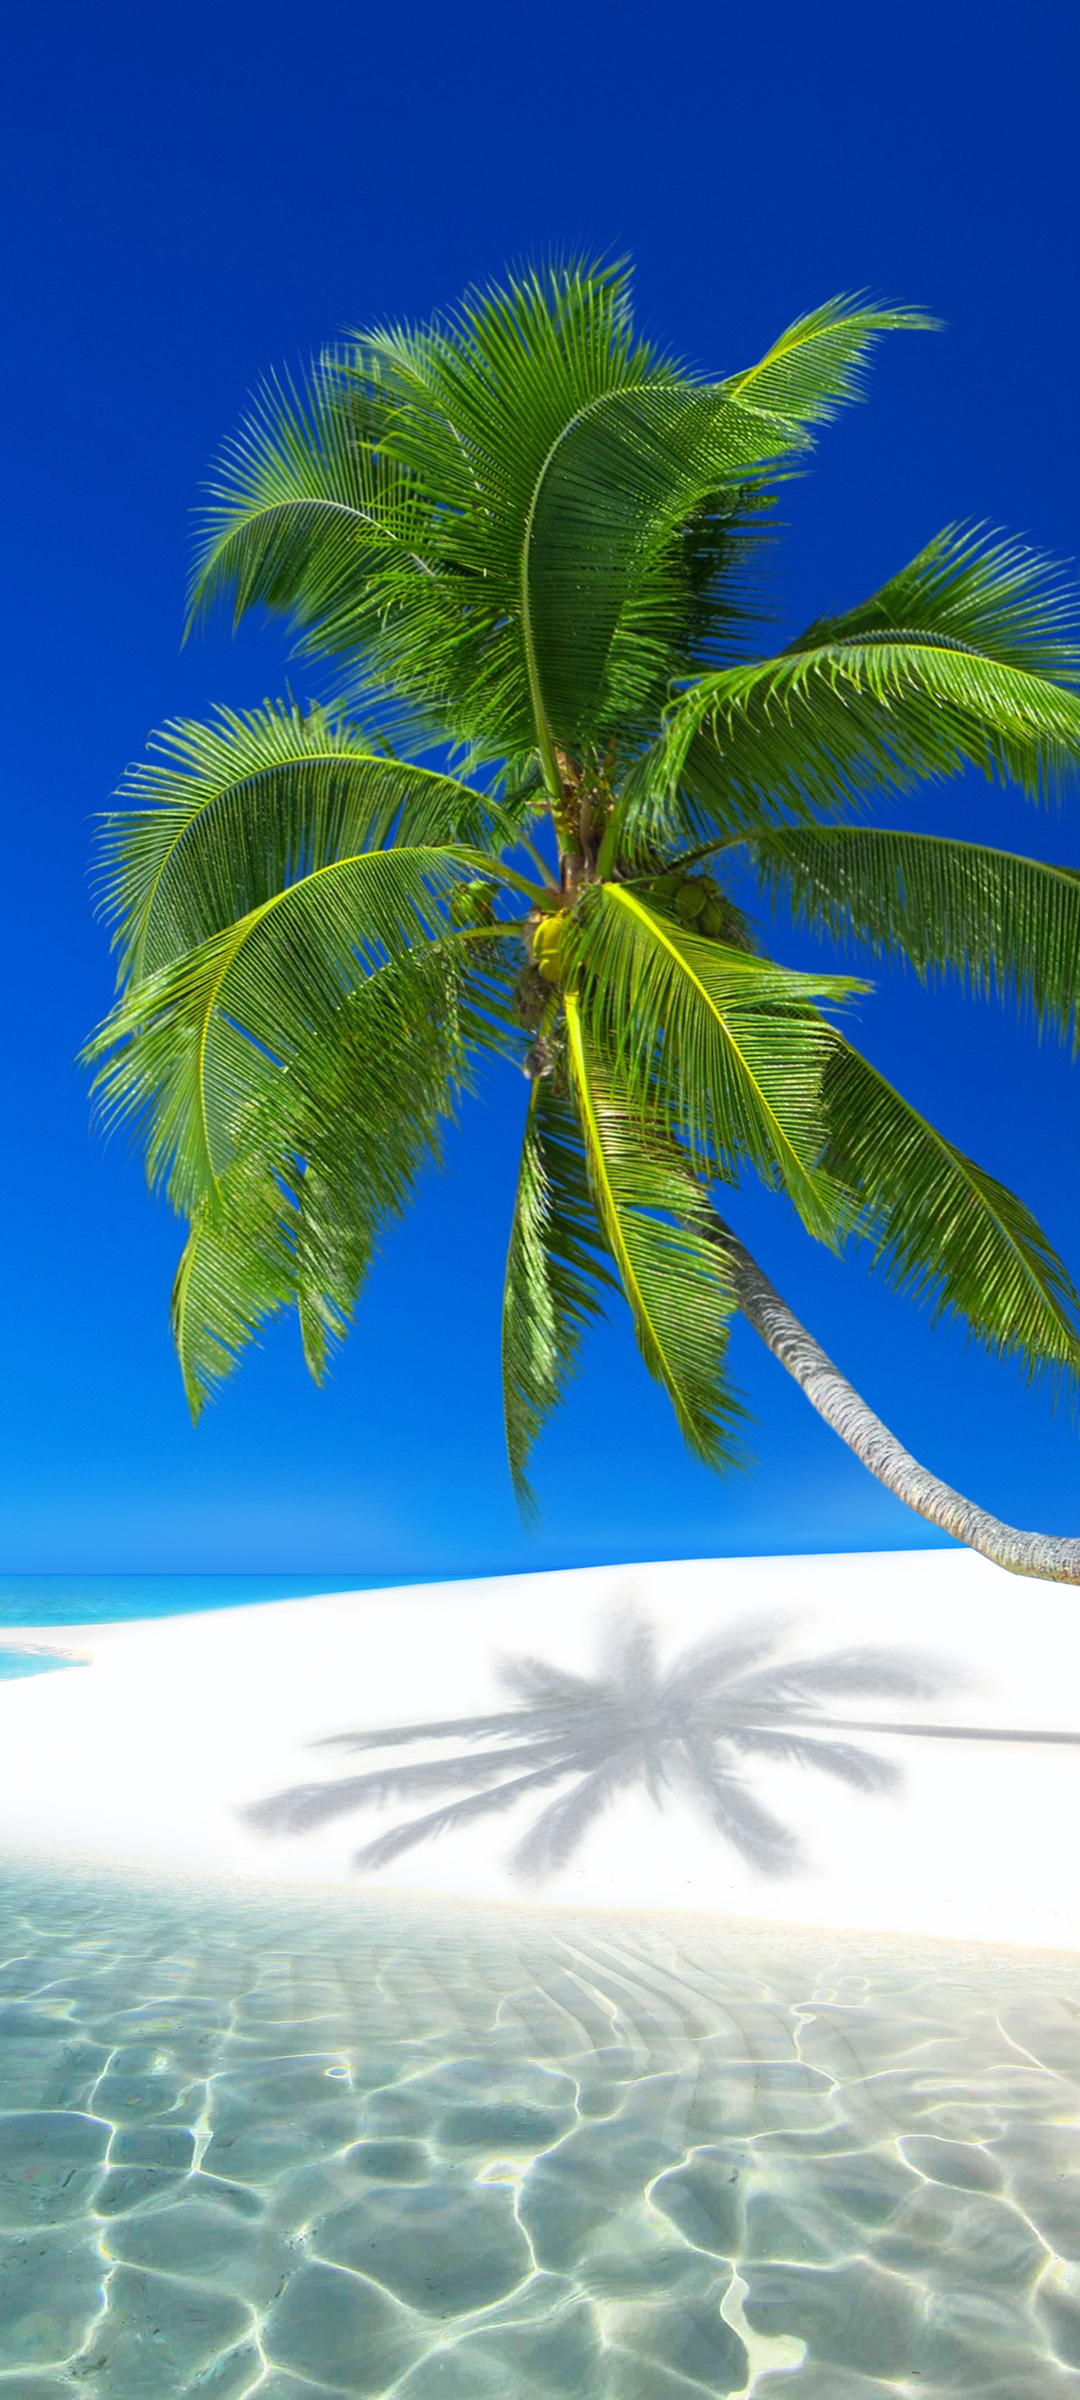 Mobile Wallpaper With Tropical Vegetation Background Images Free Download  on Lovepik  400569614